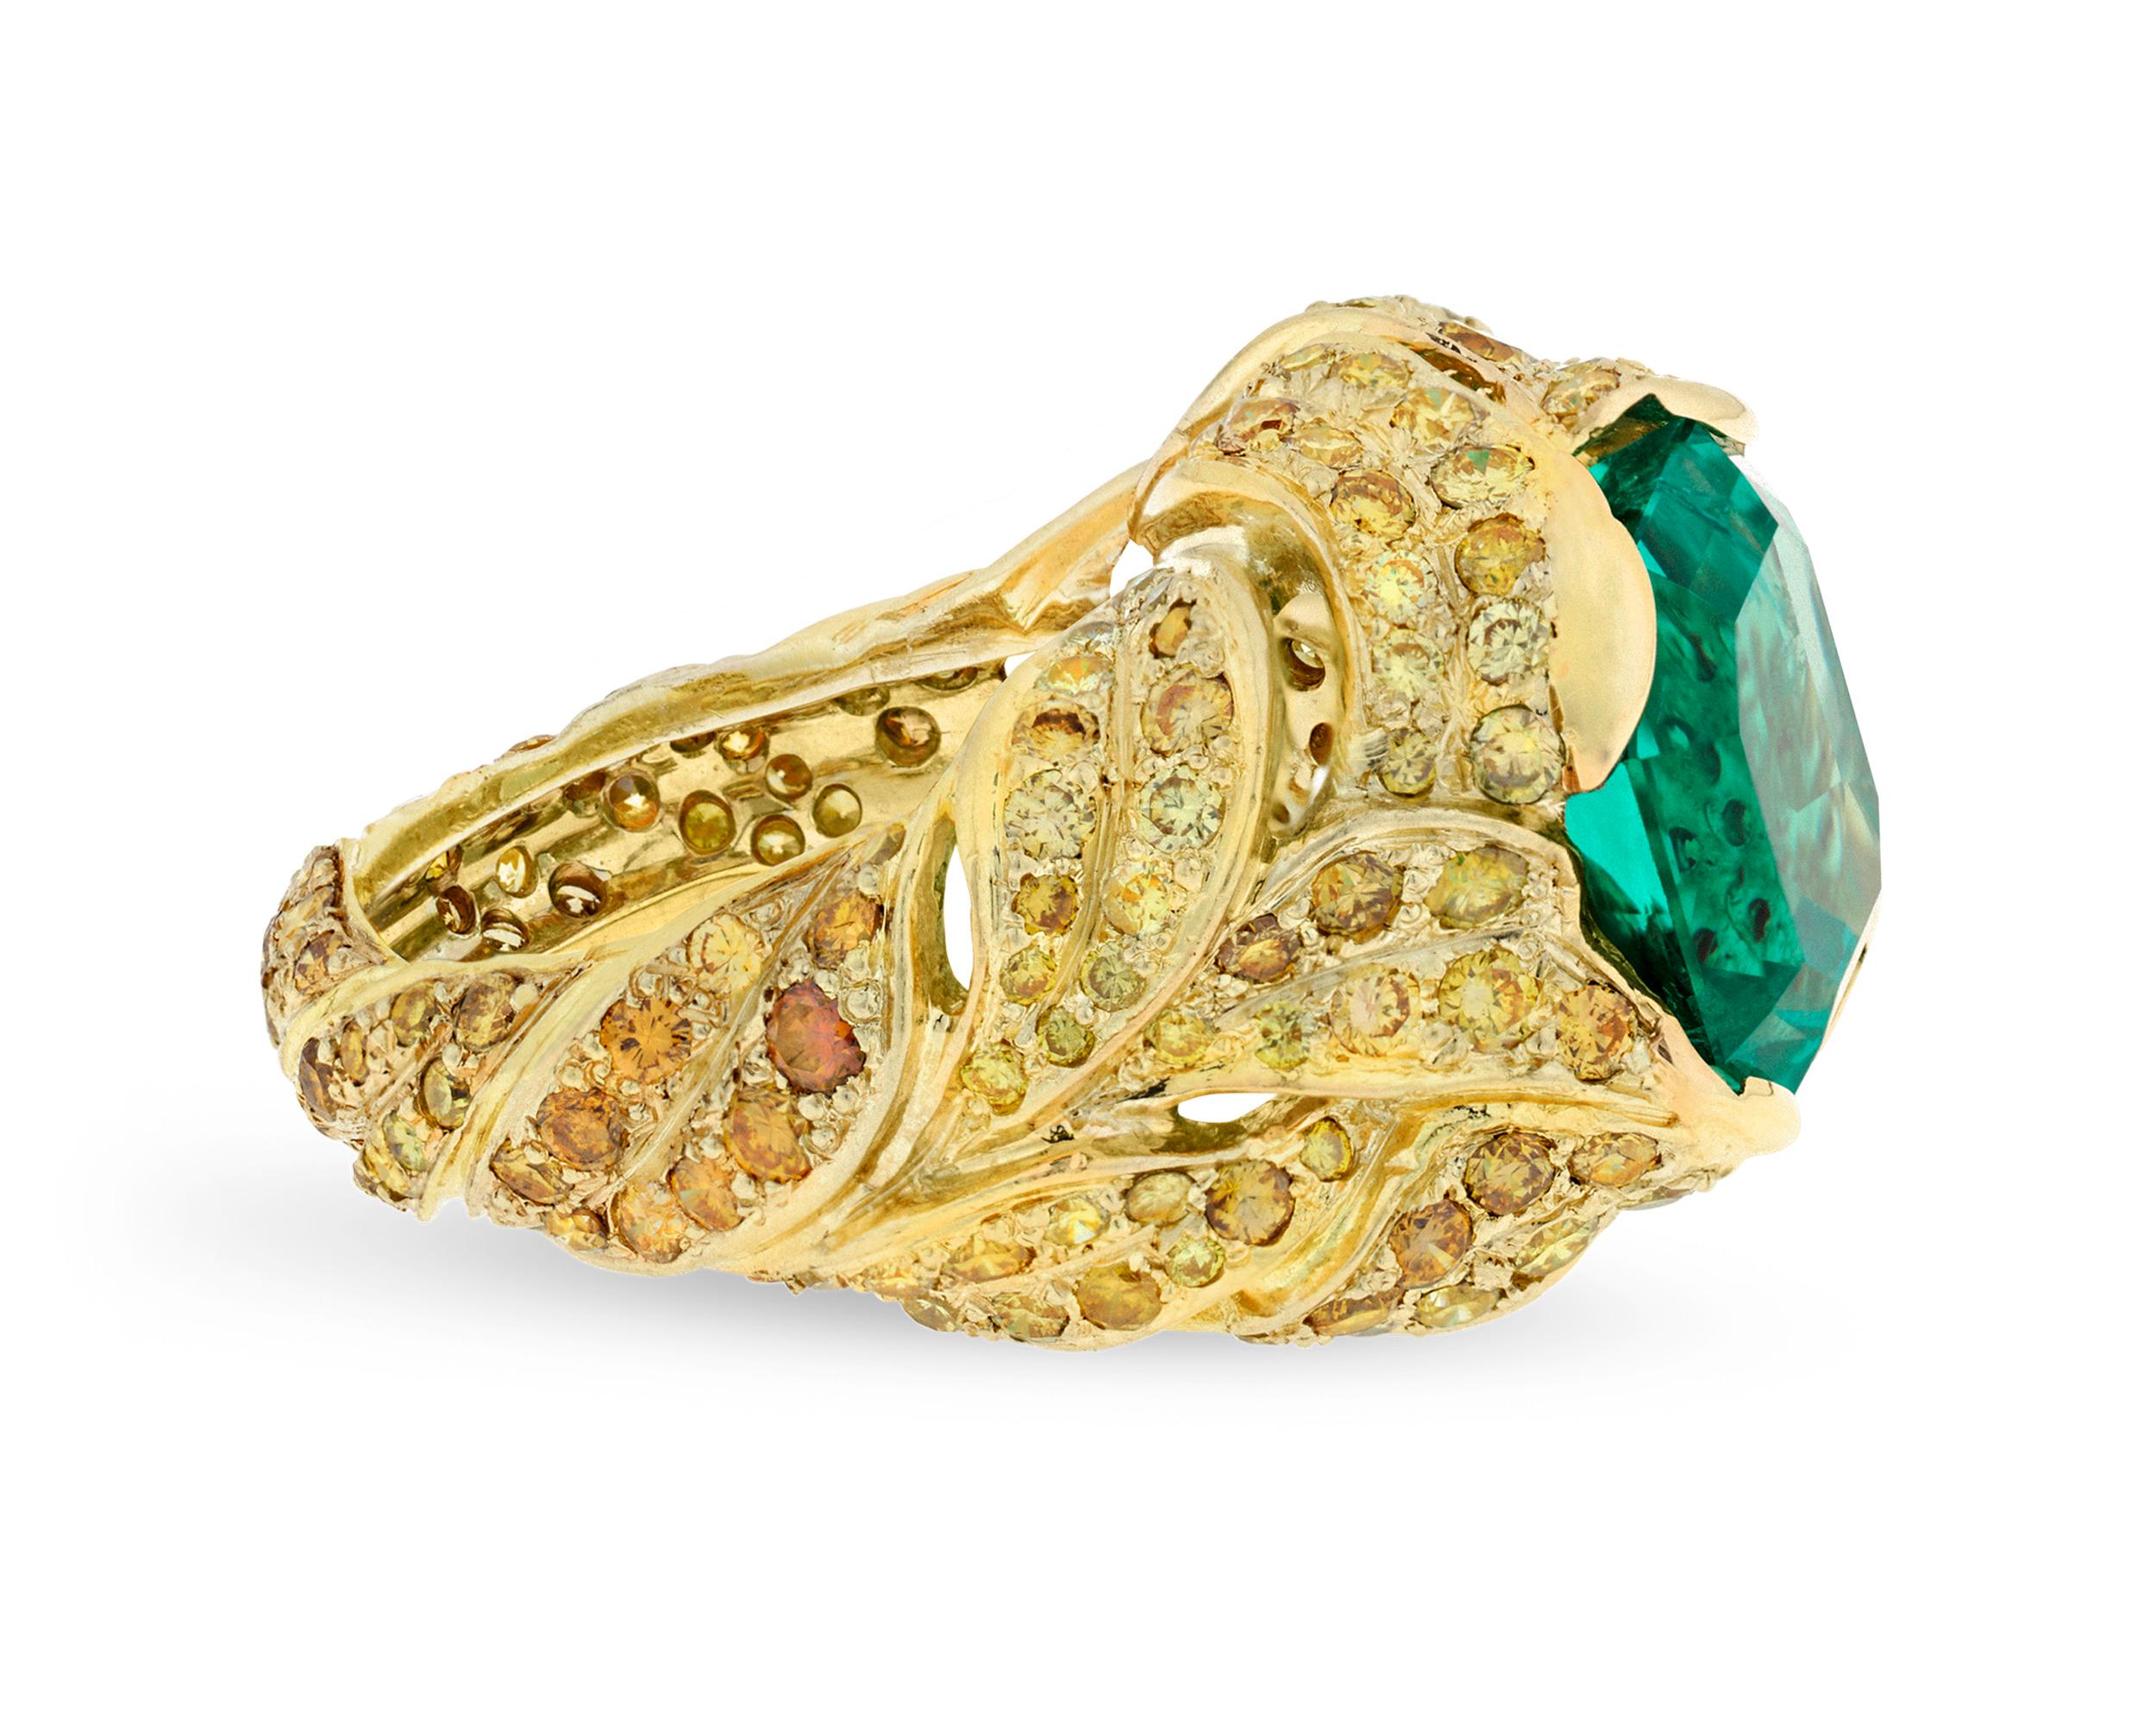 An exceptional untreated 5.94-carat Colombian emerald makes a breathtaking impression in this dramatic ring by the famed jewelry designer to the stars, Fred Leighton. For centuries, Colombia has been the prime location for the mining of the finest